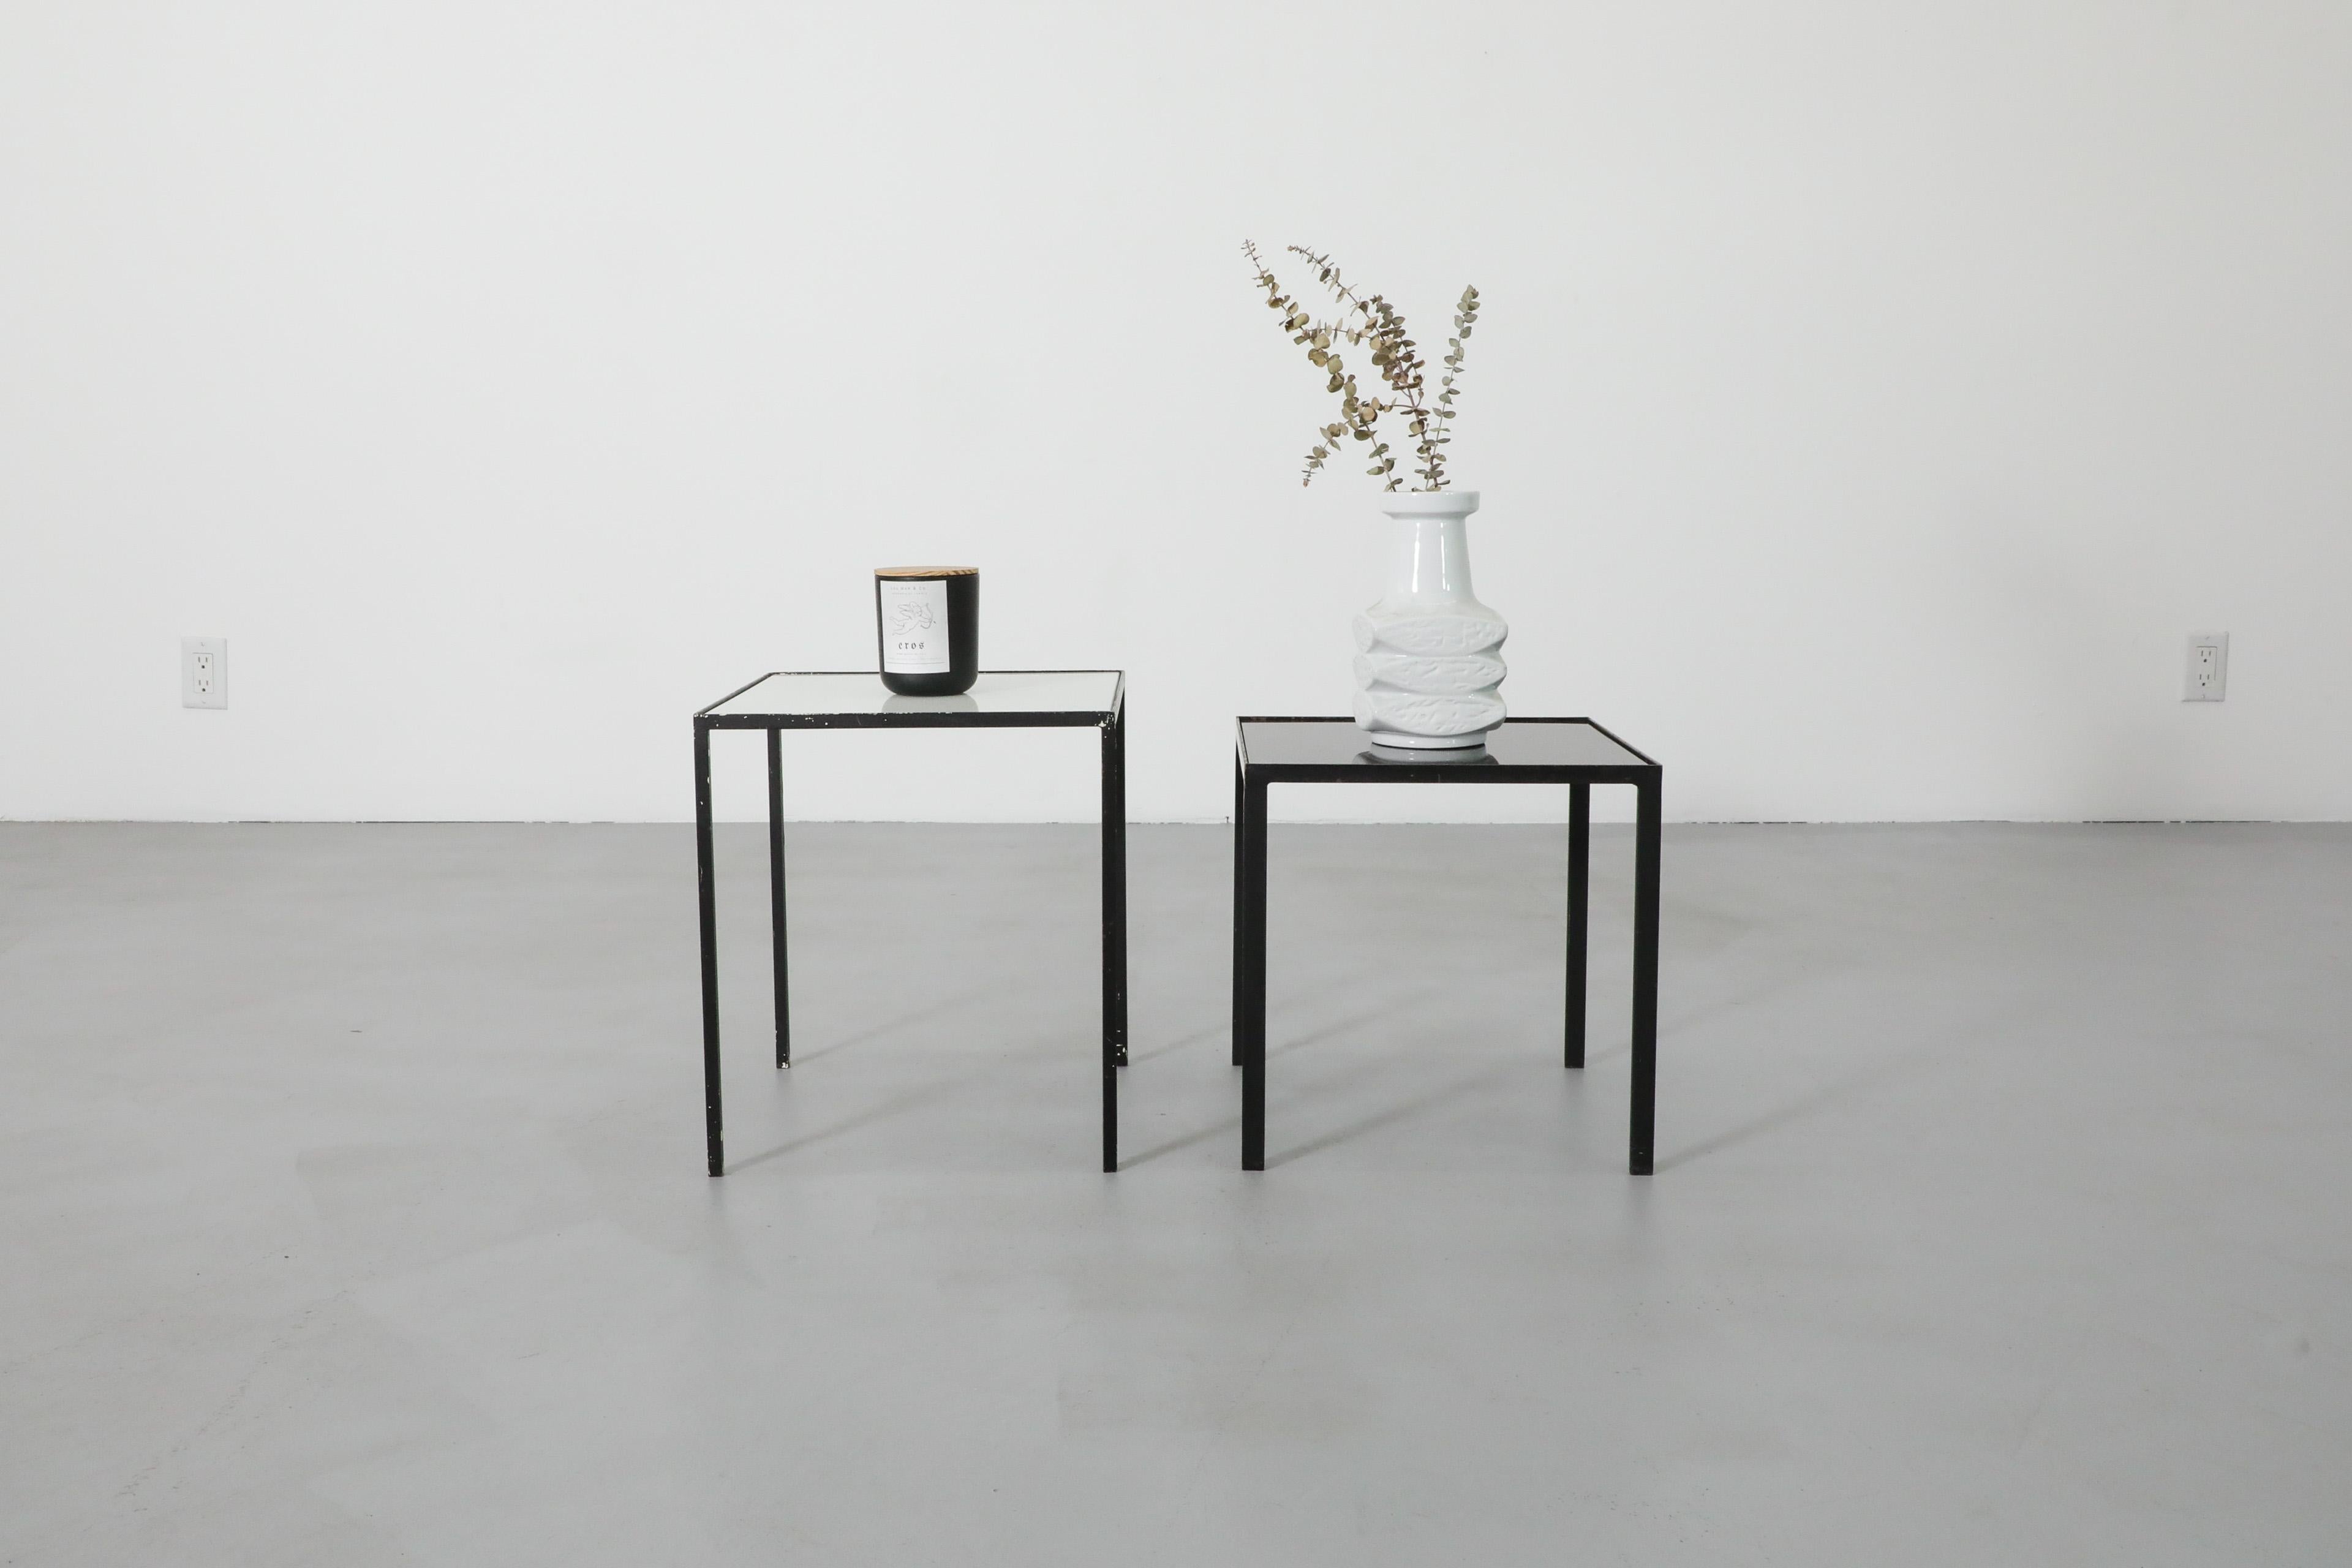 Pair of Mid-Century side tables by Dutch furniture manufacterer Artimeta. Features black enameled metal frames with white & black square glass tops making this a set of two stylish, contrasting side tables that  can be placed apart or together to